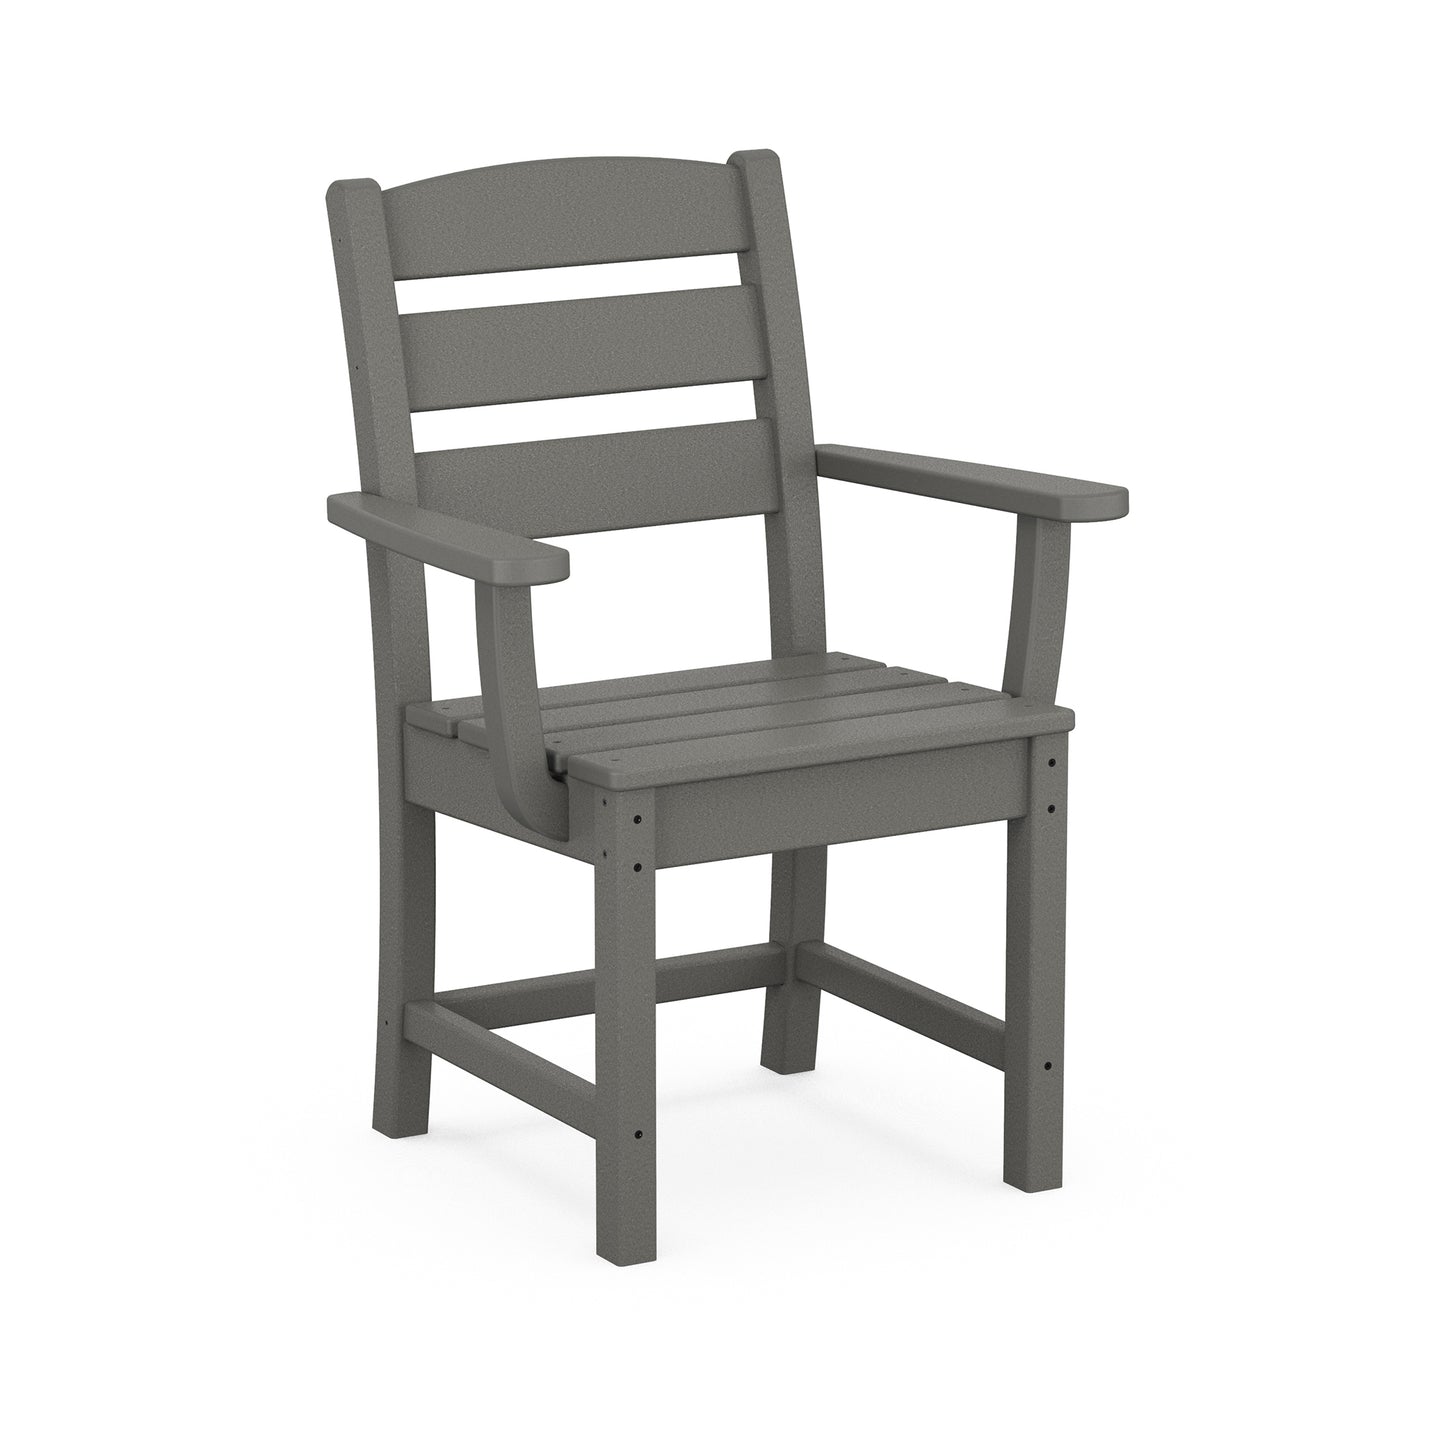 A 3D rendered image of a gray POLYWOOD Lakeside Dining Arm Chair with a high back and armrests, set against a plain white background.